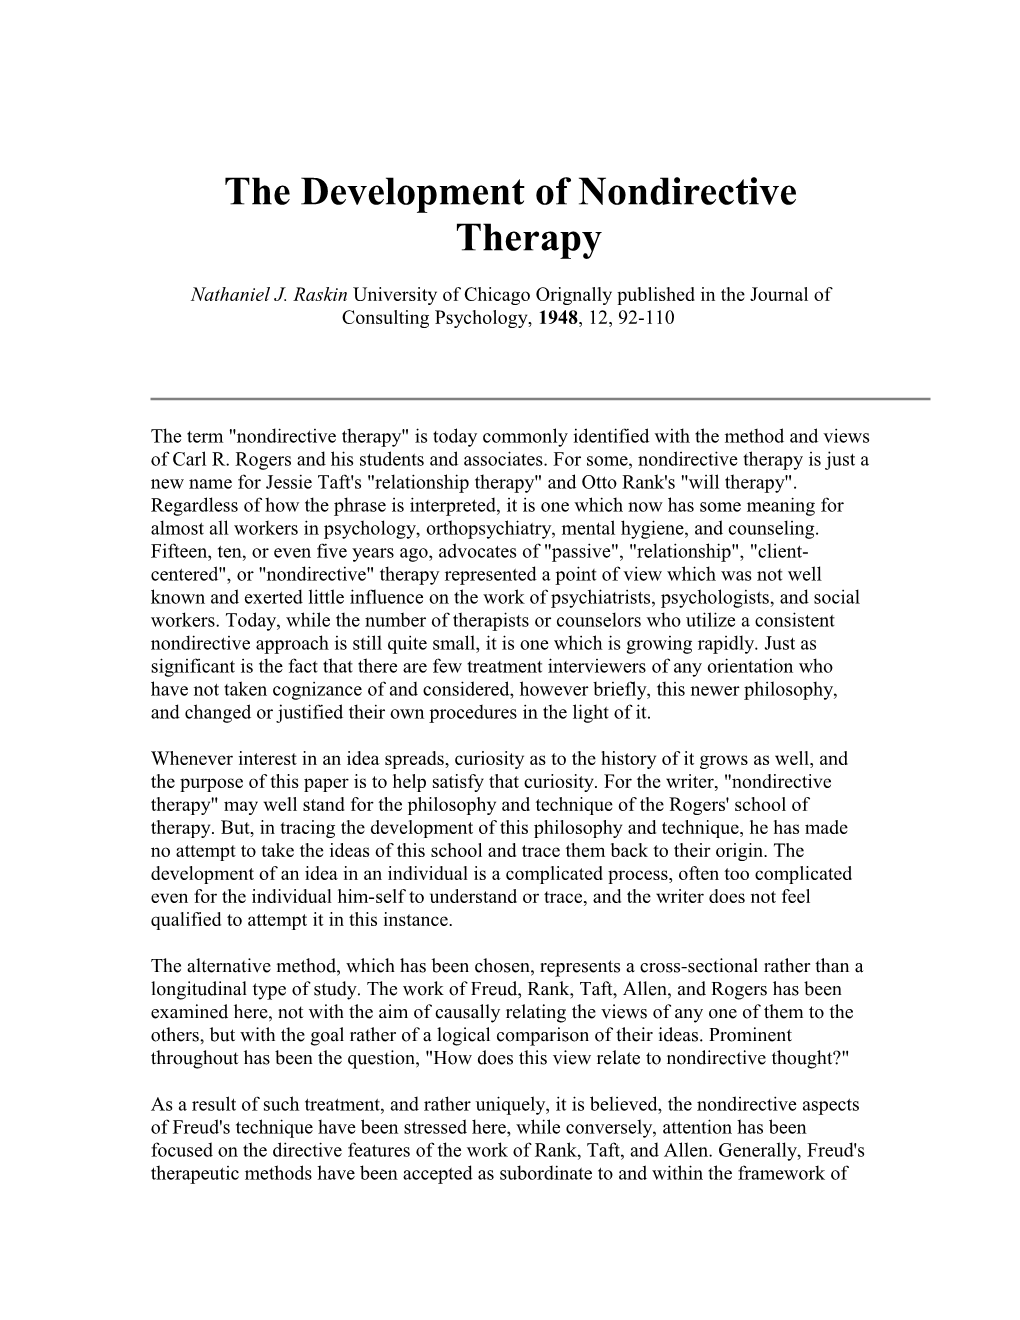 The Development of Nondirective Therapy